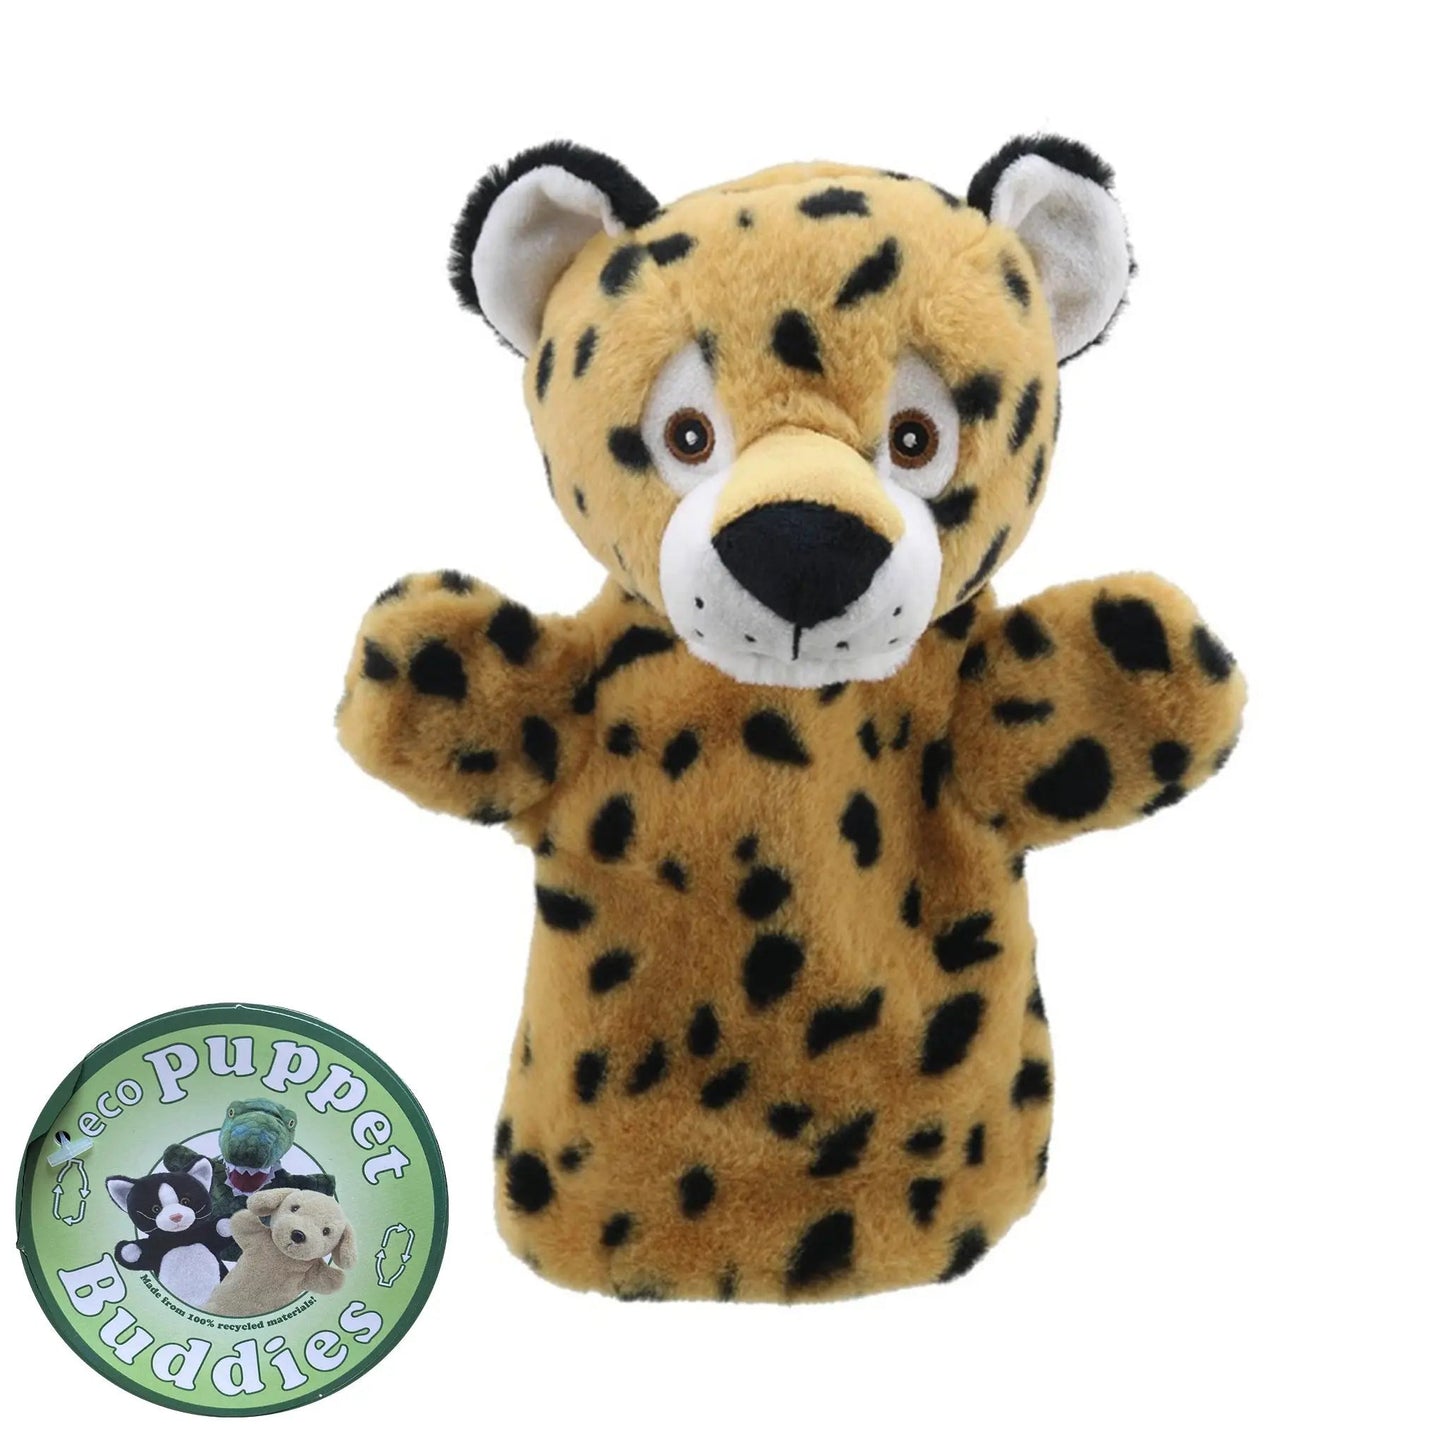 Leopard Eco Puppet Buddies Hand Puppet - The Puppet Company - The Forgotten Toy Shop